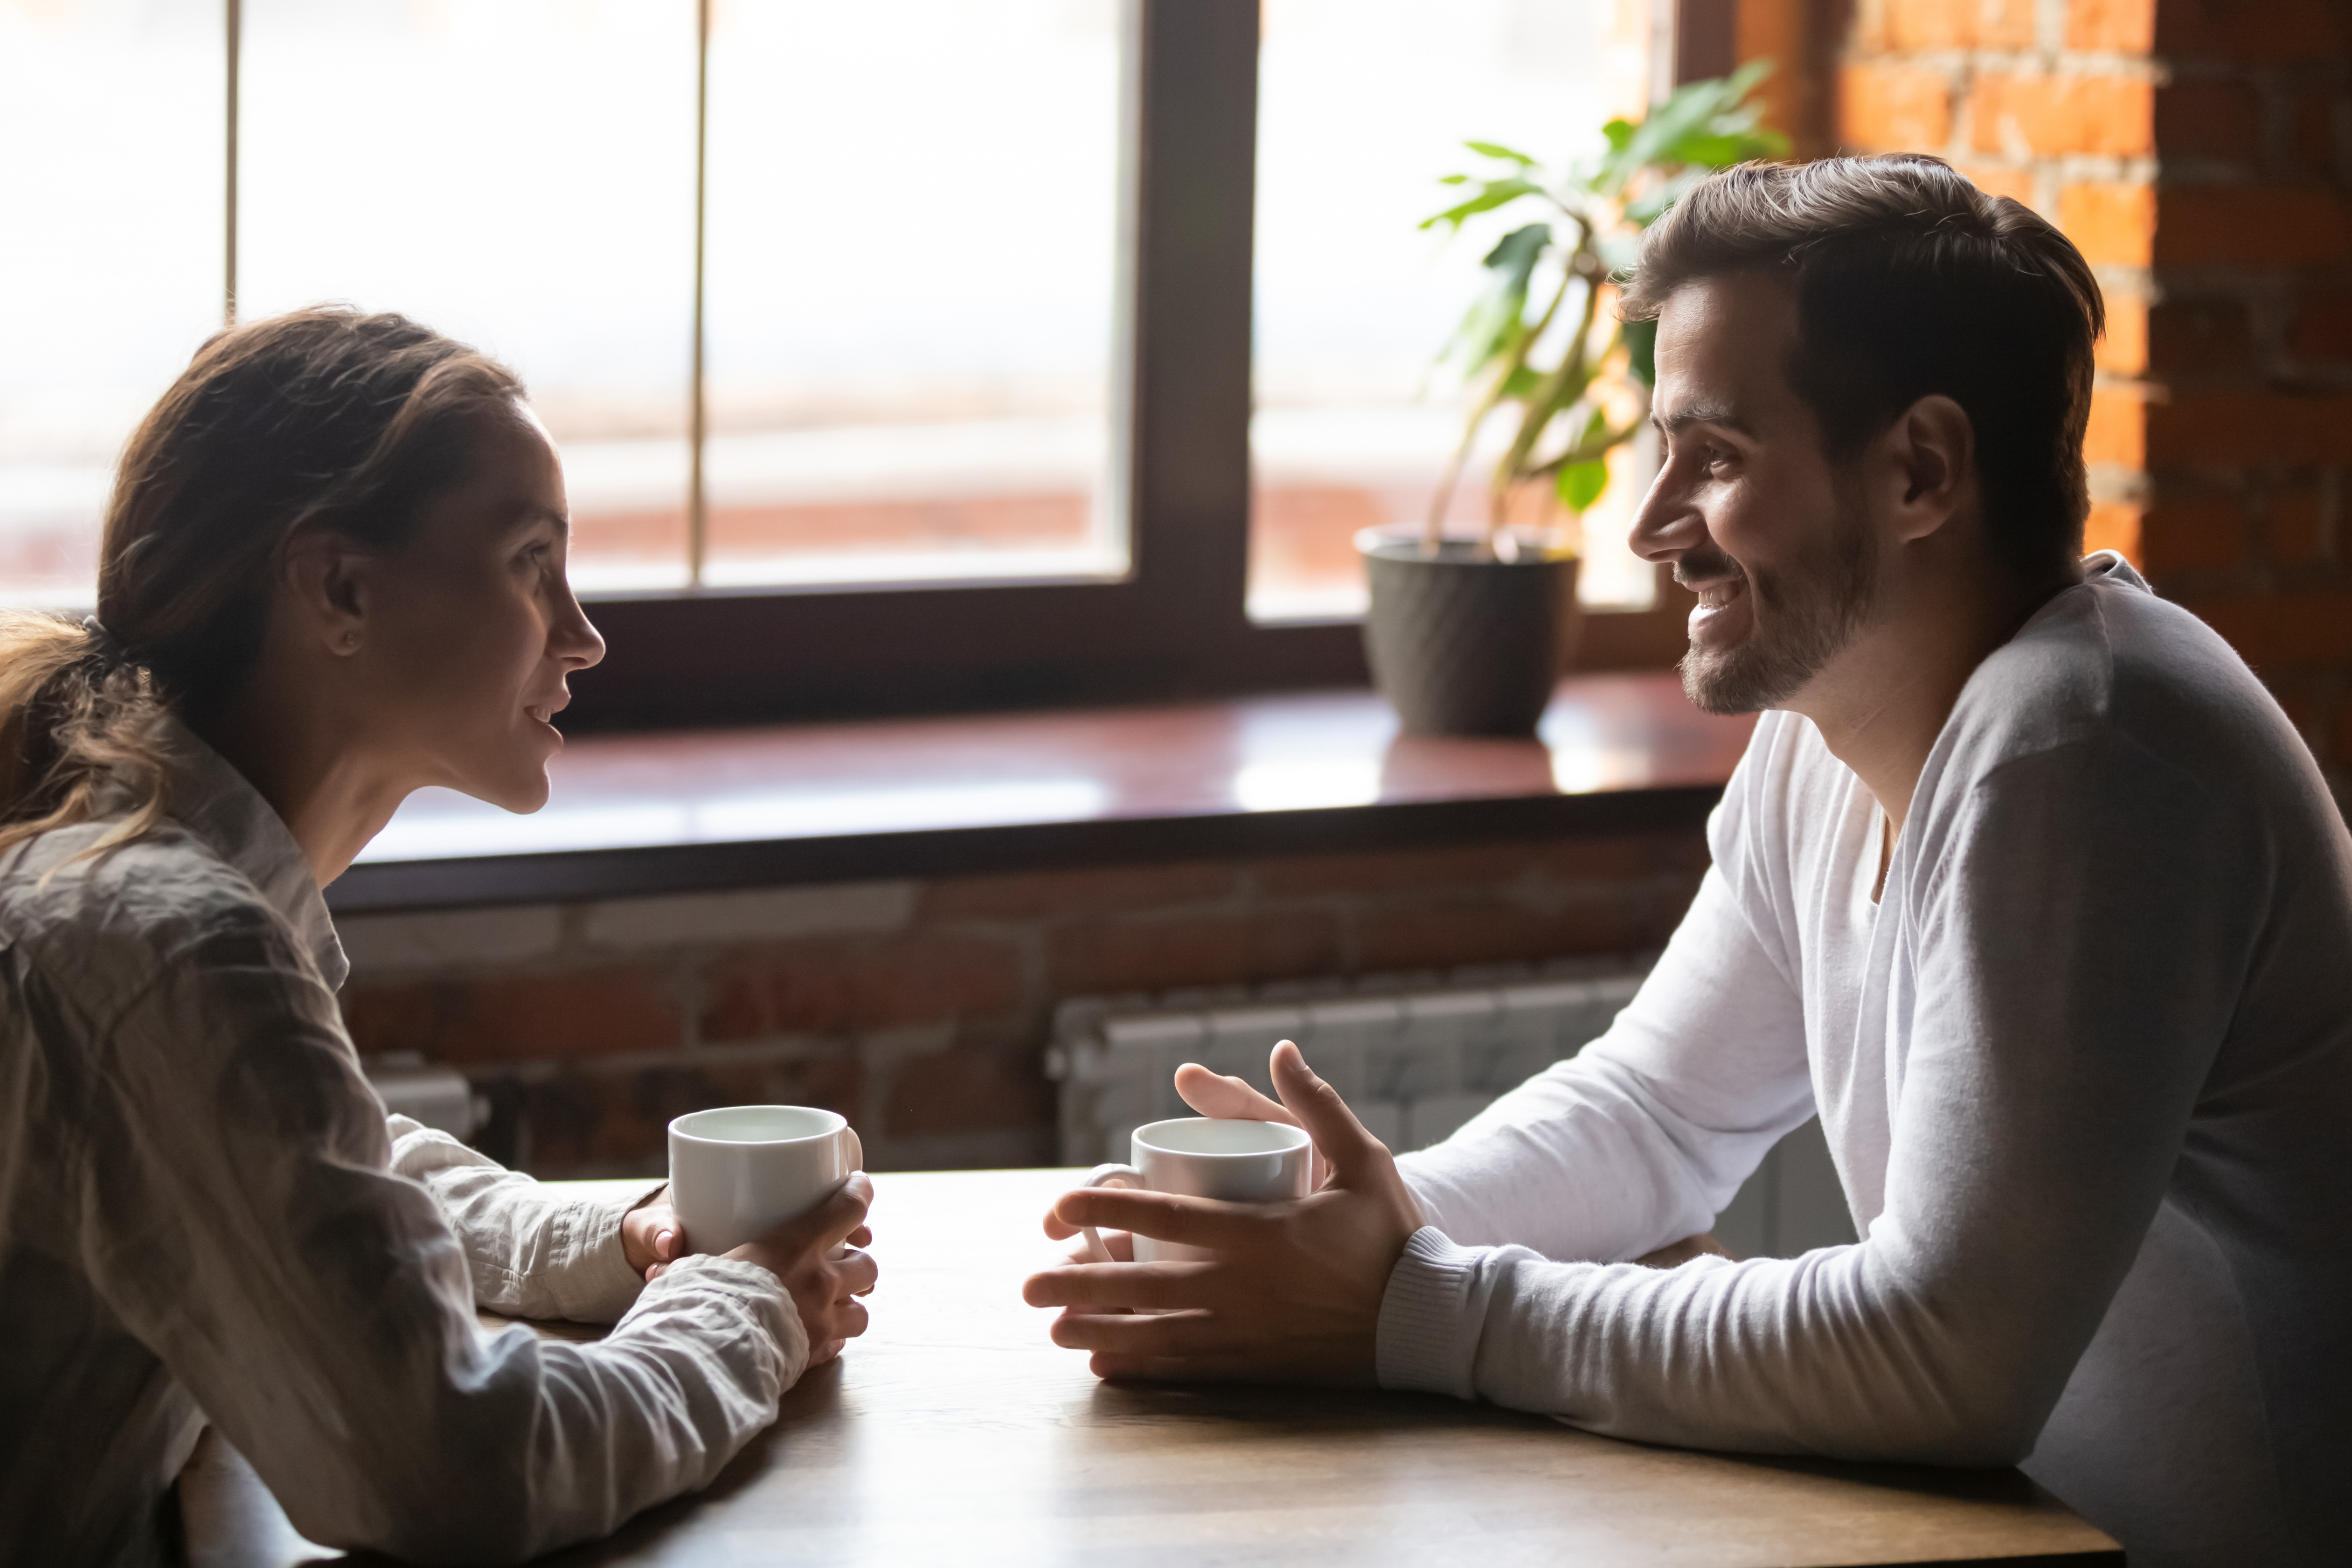 Man and woman have conversation | Source: Shutterstock